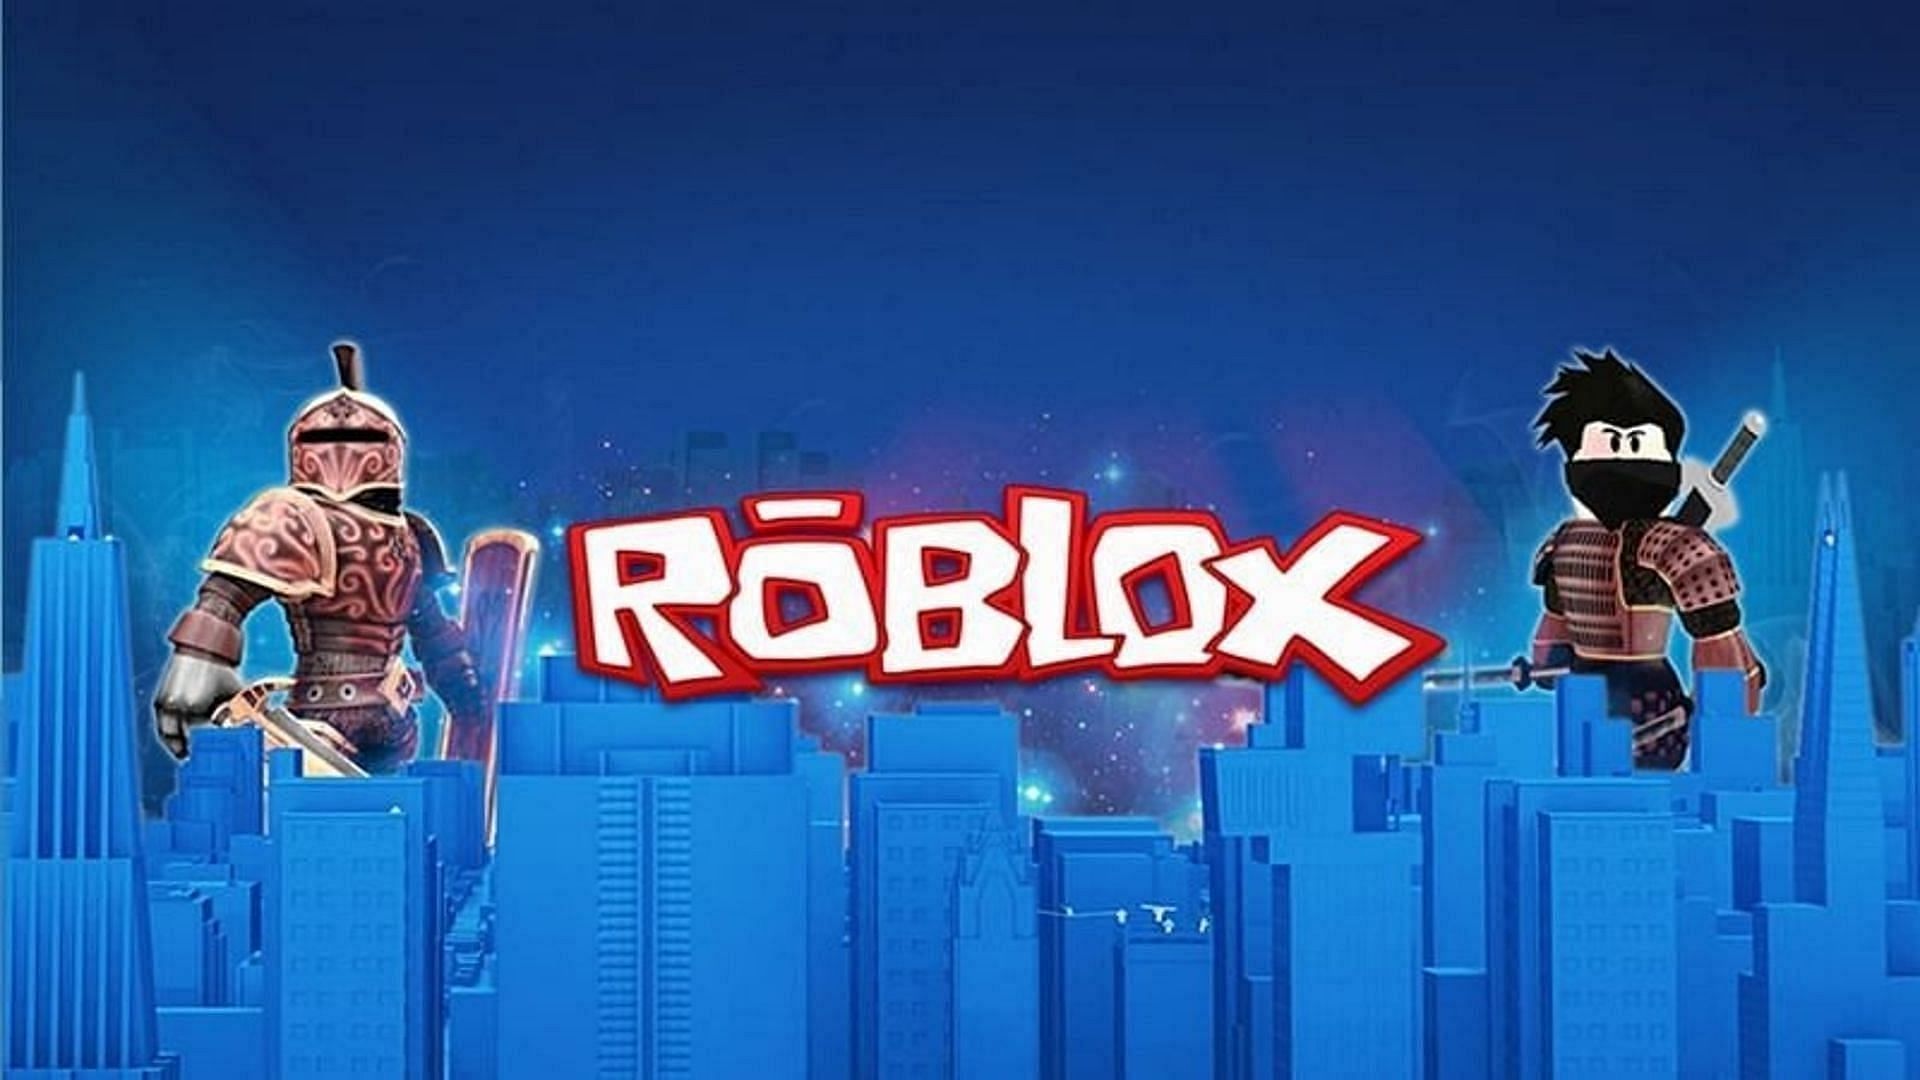 Dominus Roblox Wallpapers - Top Free Dominus Roblox Backgrounds